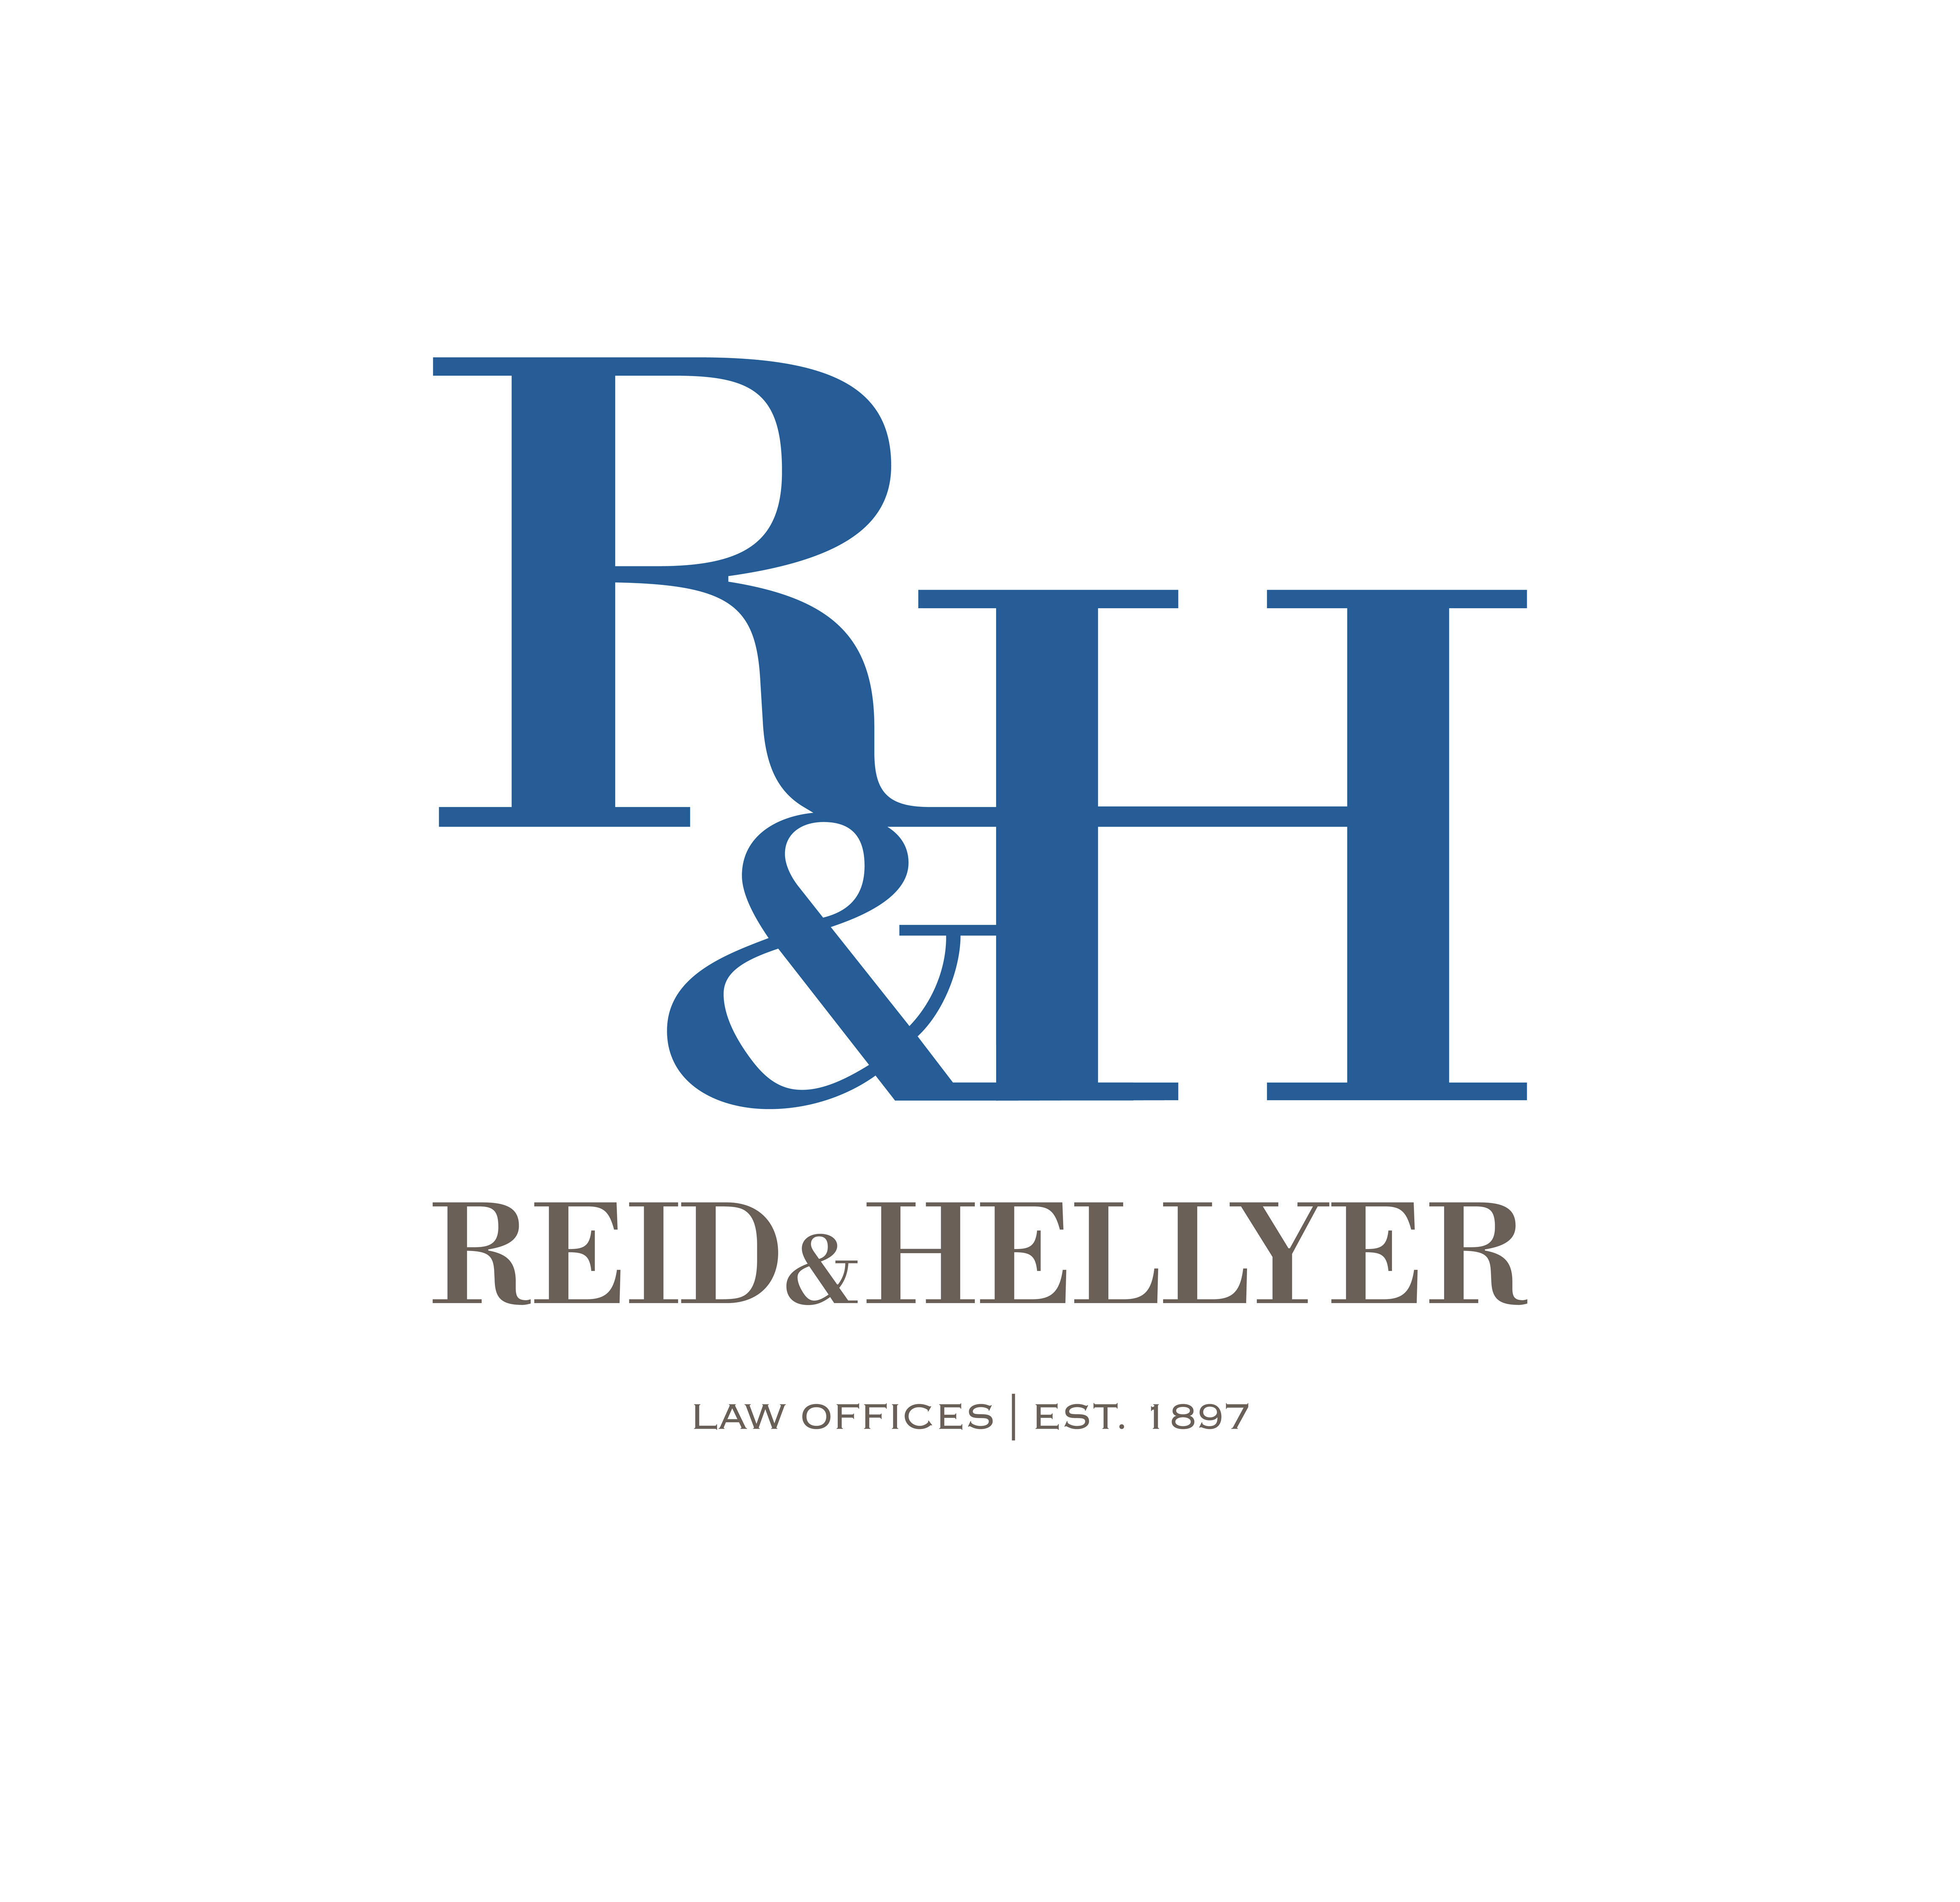 Reid & Hellyer Shares an Overview of the Services They Provide